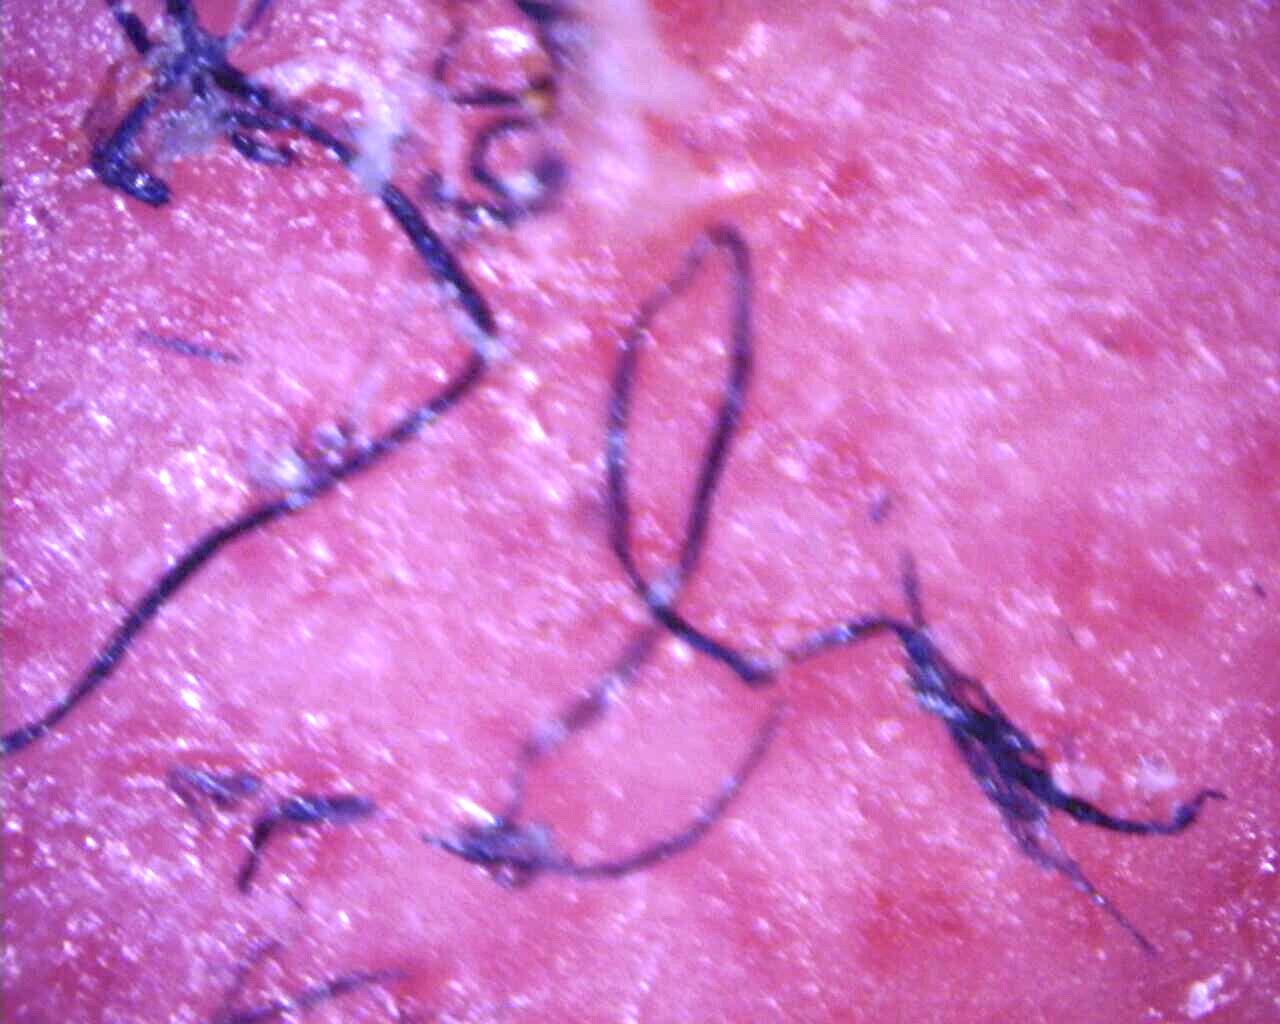 Filaments remain embedded in deeper layers of skin after removal of a callus ( 100X magnification).